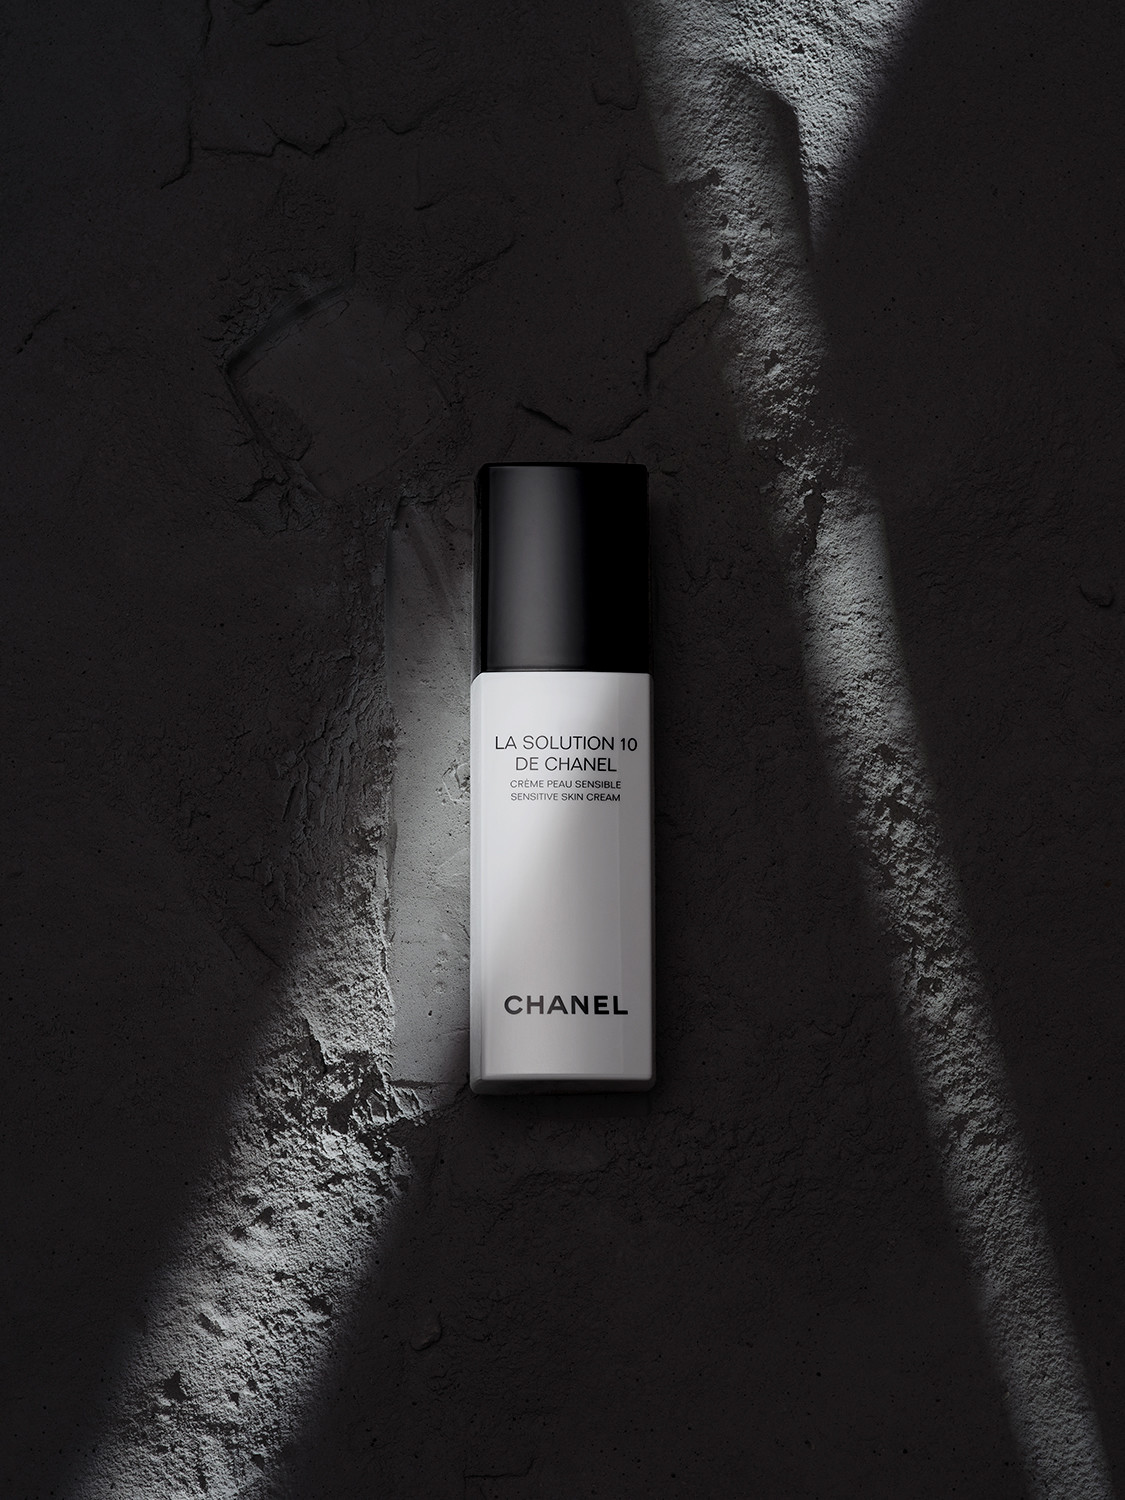 CHANEL BEAUTY, sHOT BY MARCUS SCHAEFER - © artifices